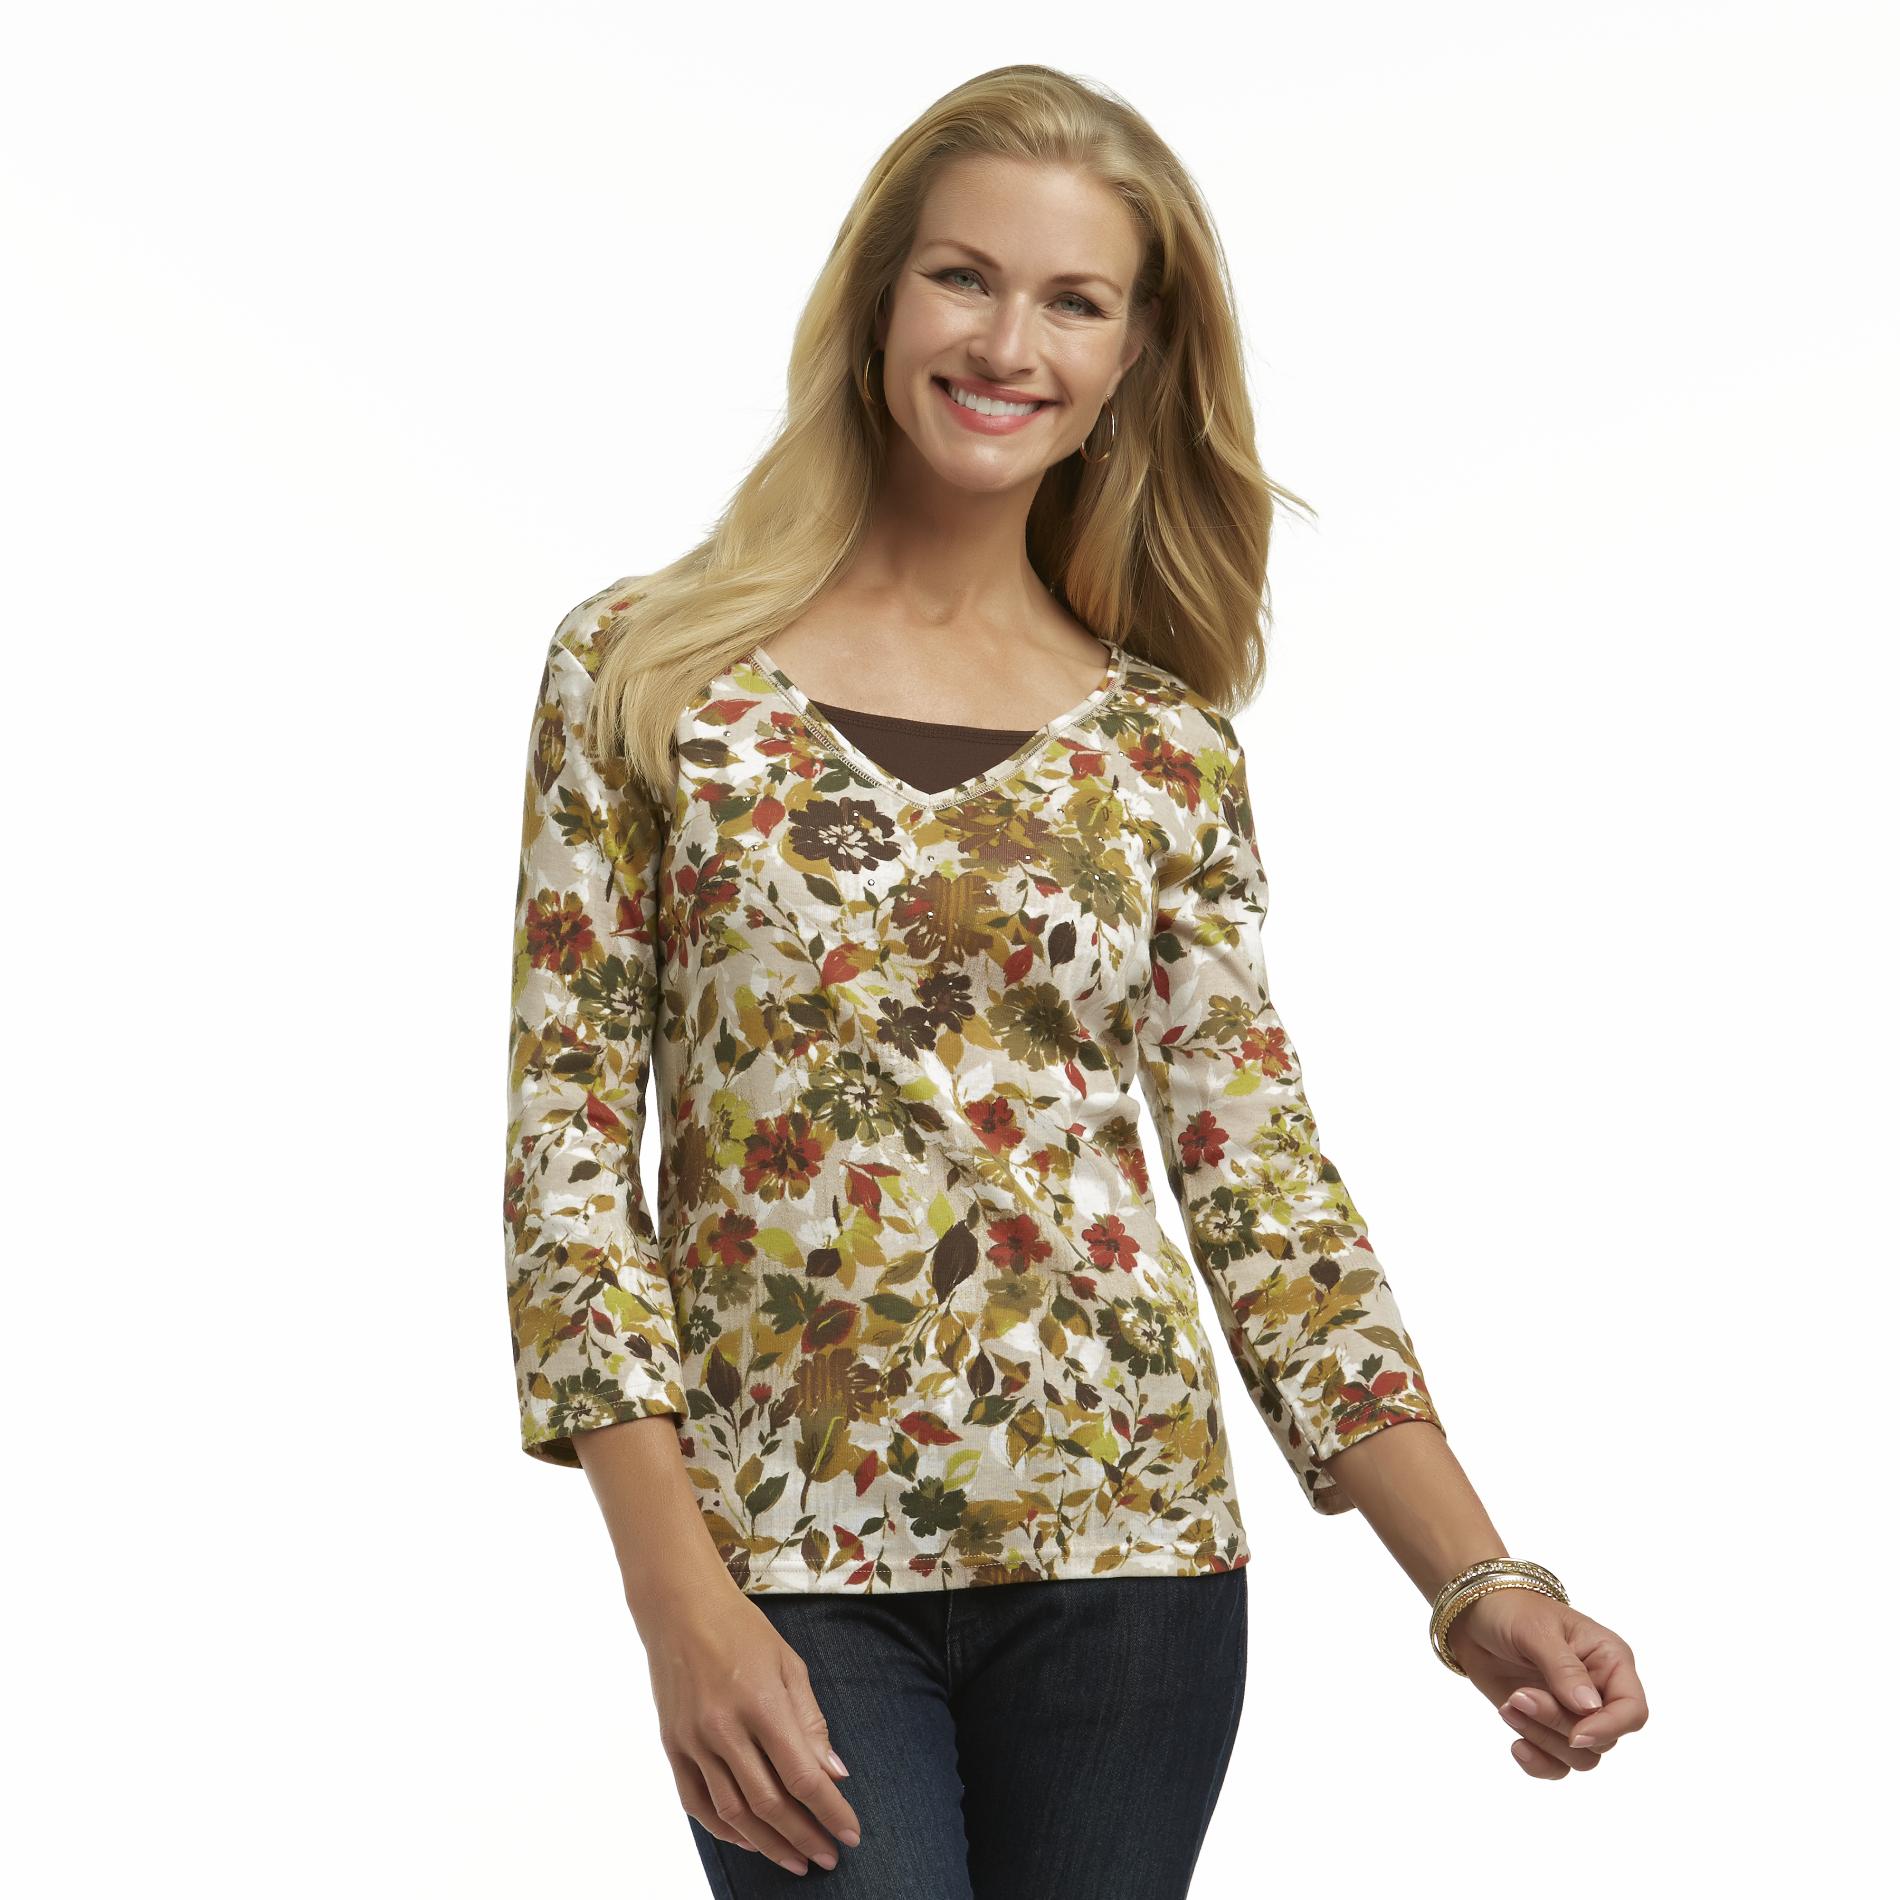 Basic Editions Women's Layered-Look Top - Floral